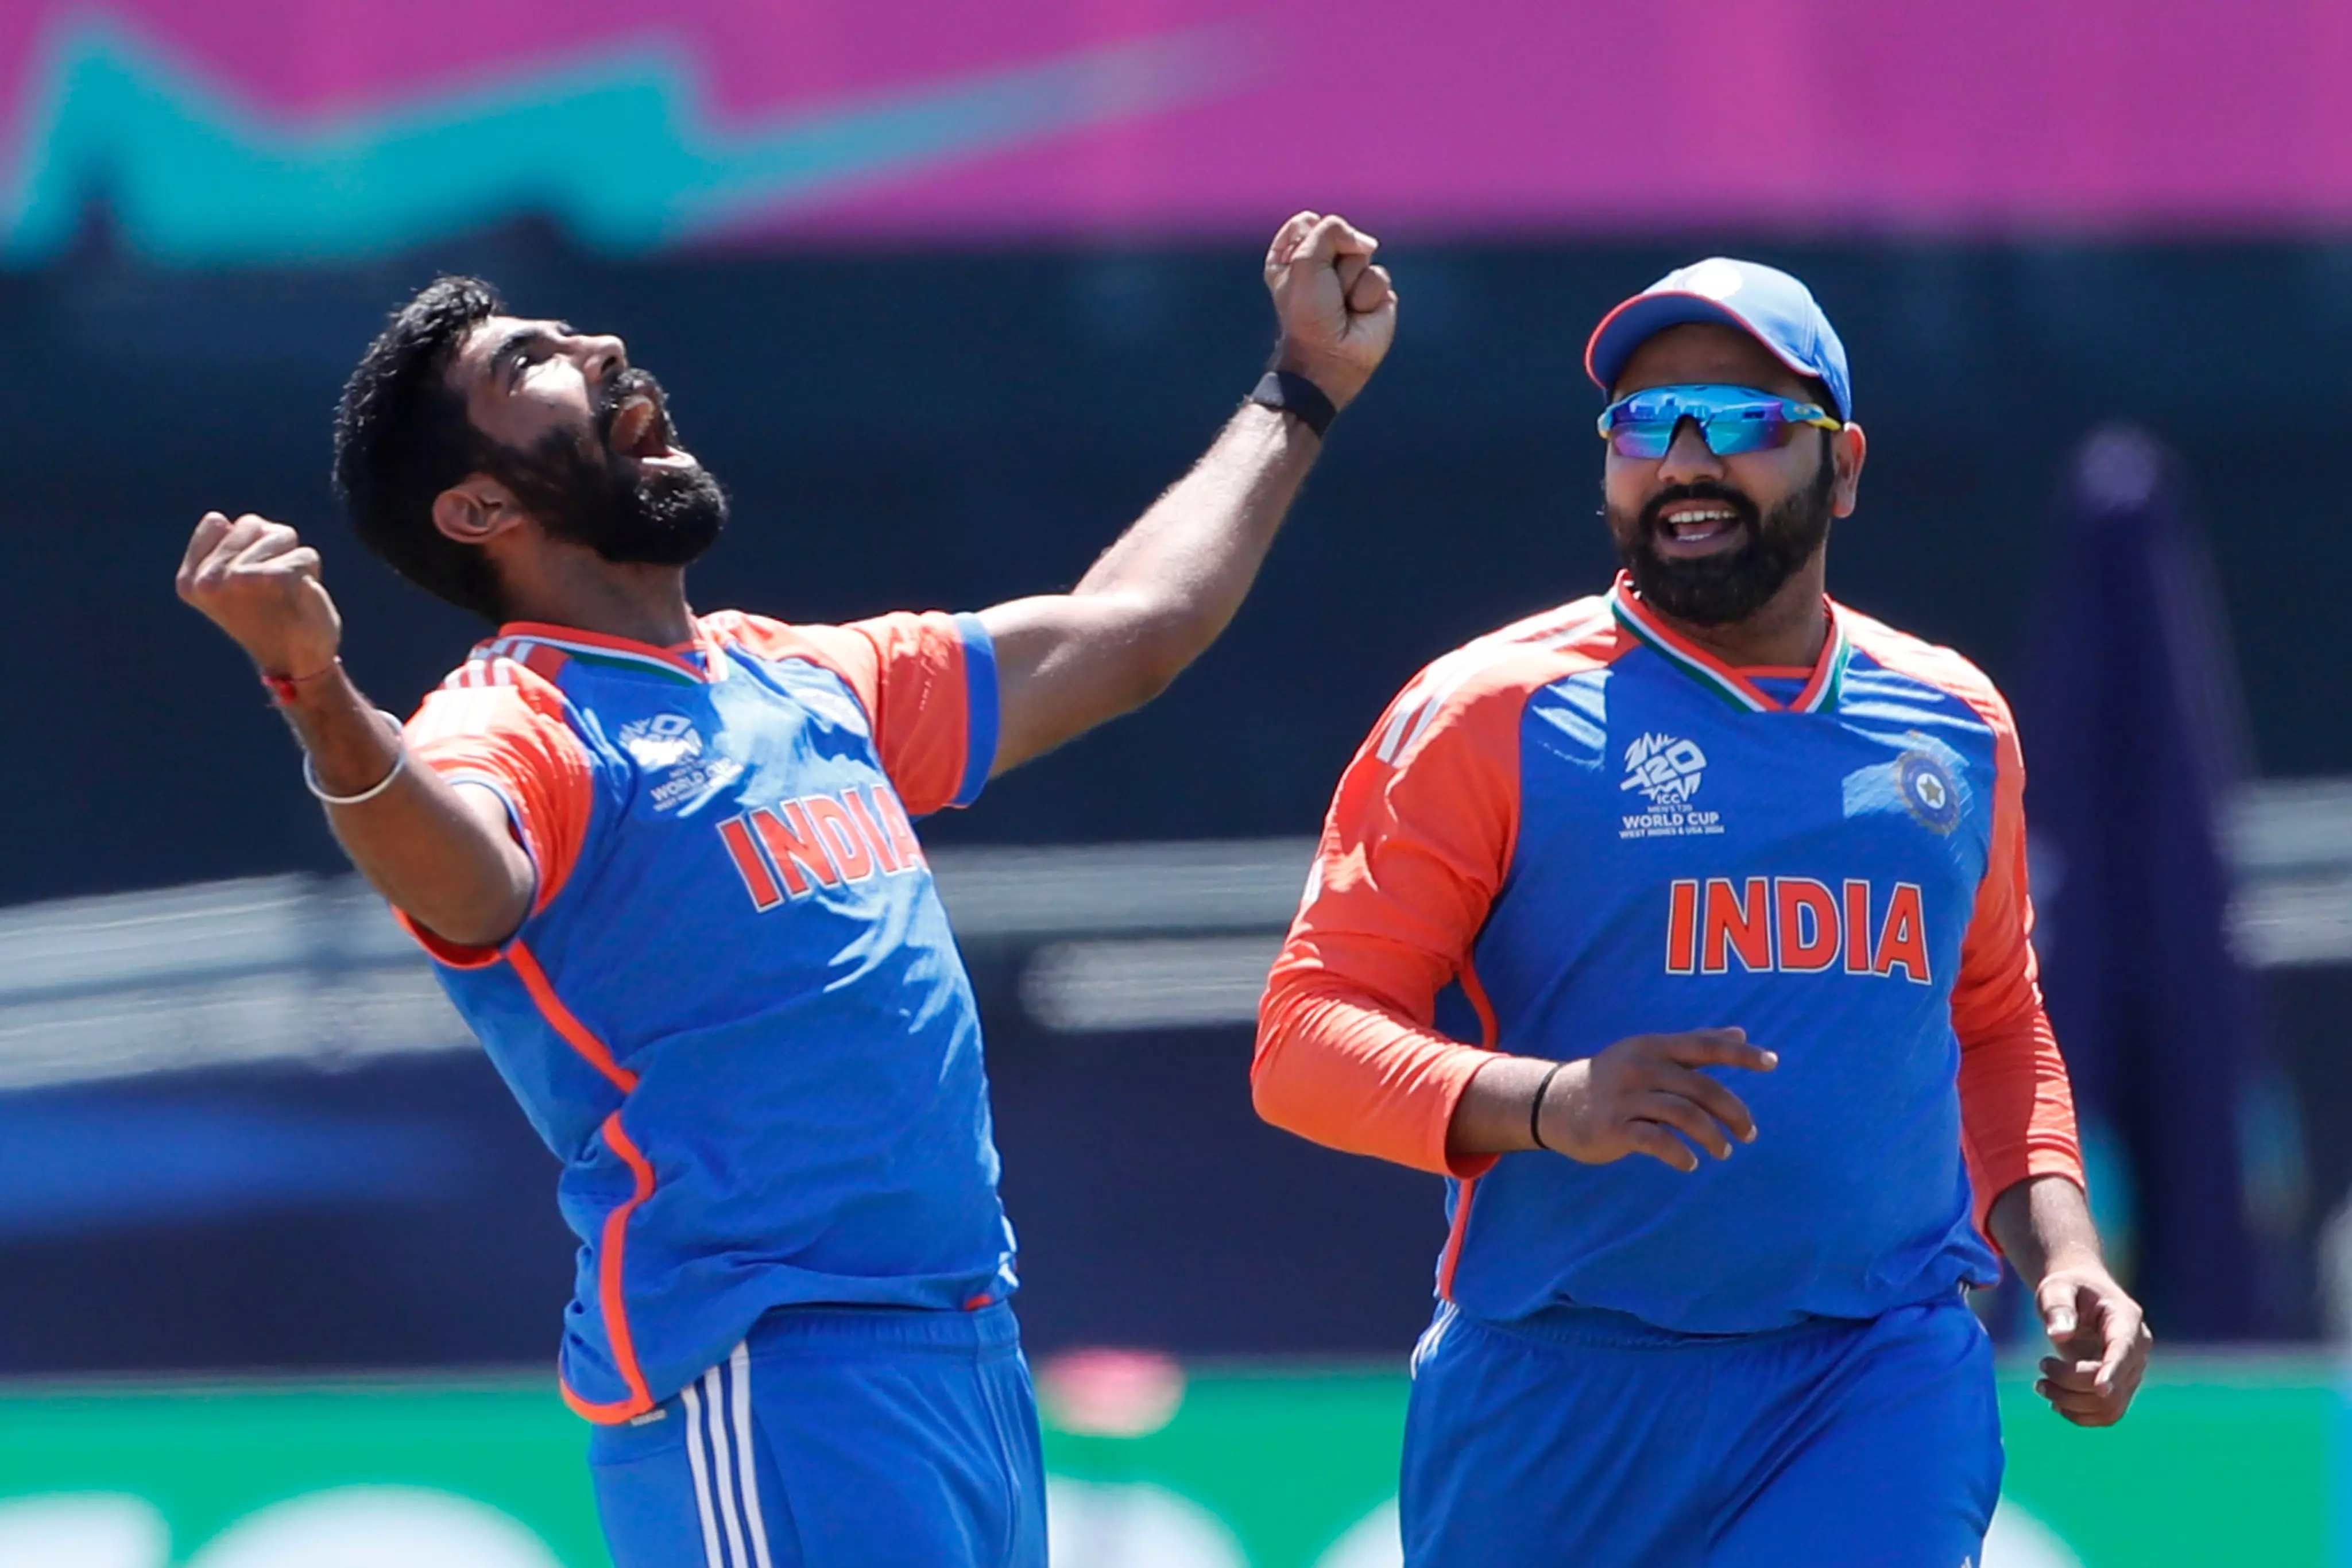 Bumrah is a genius, want him in this kind of mindset throughout T20 WC: Rohit